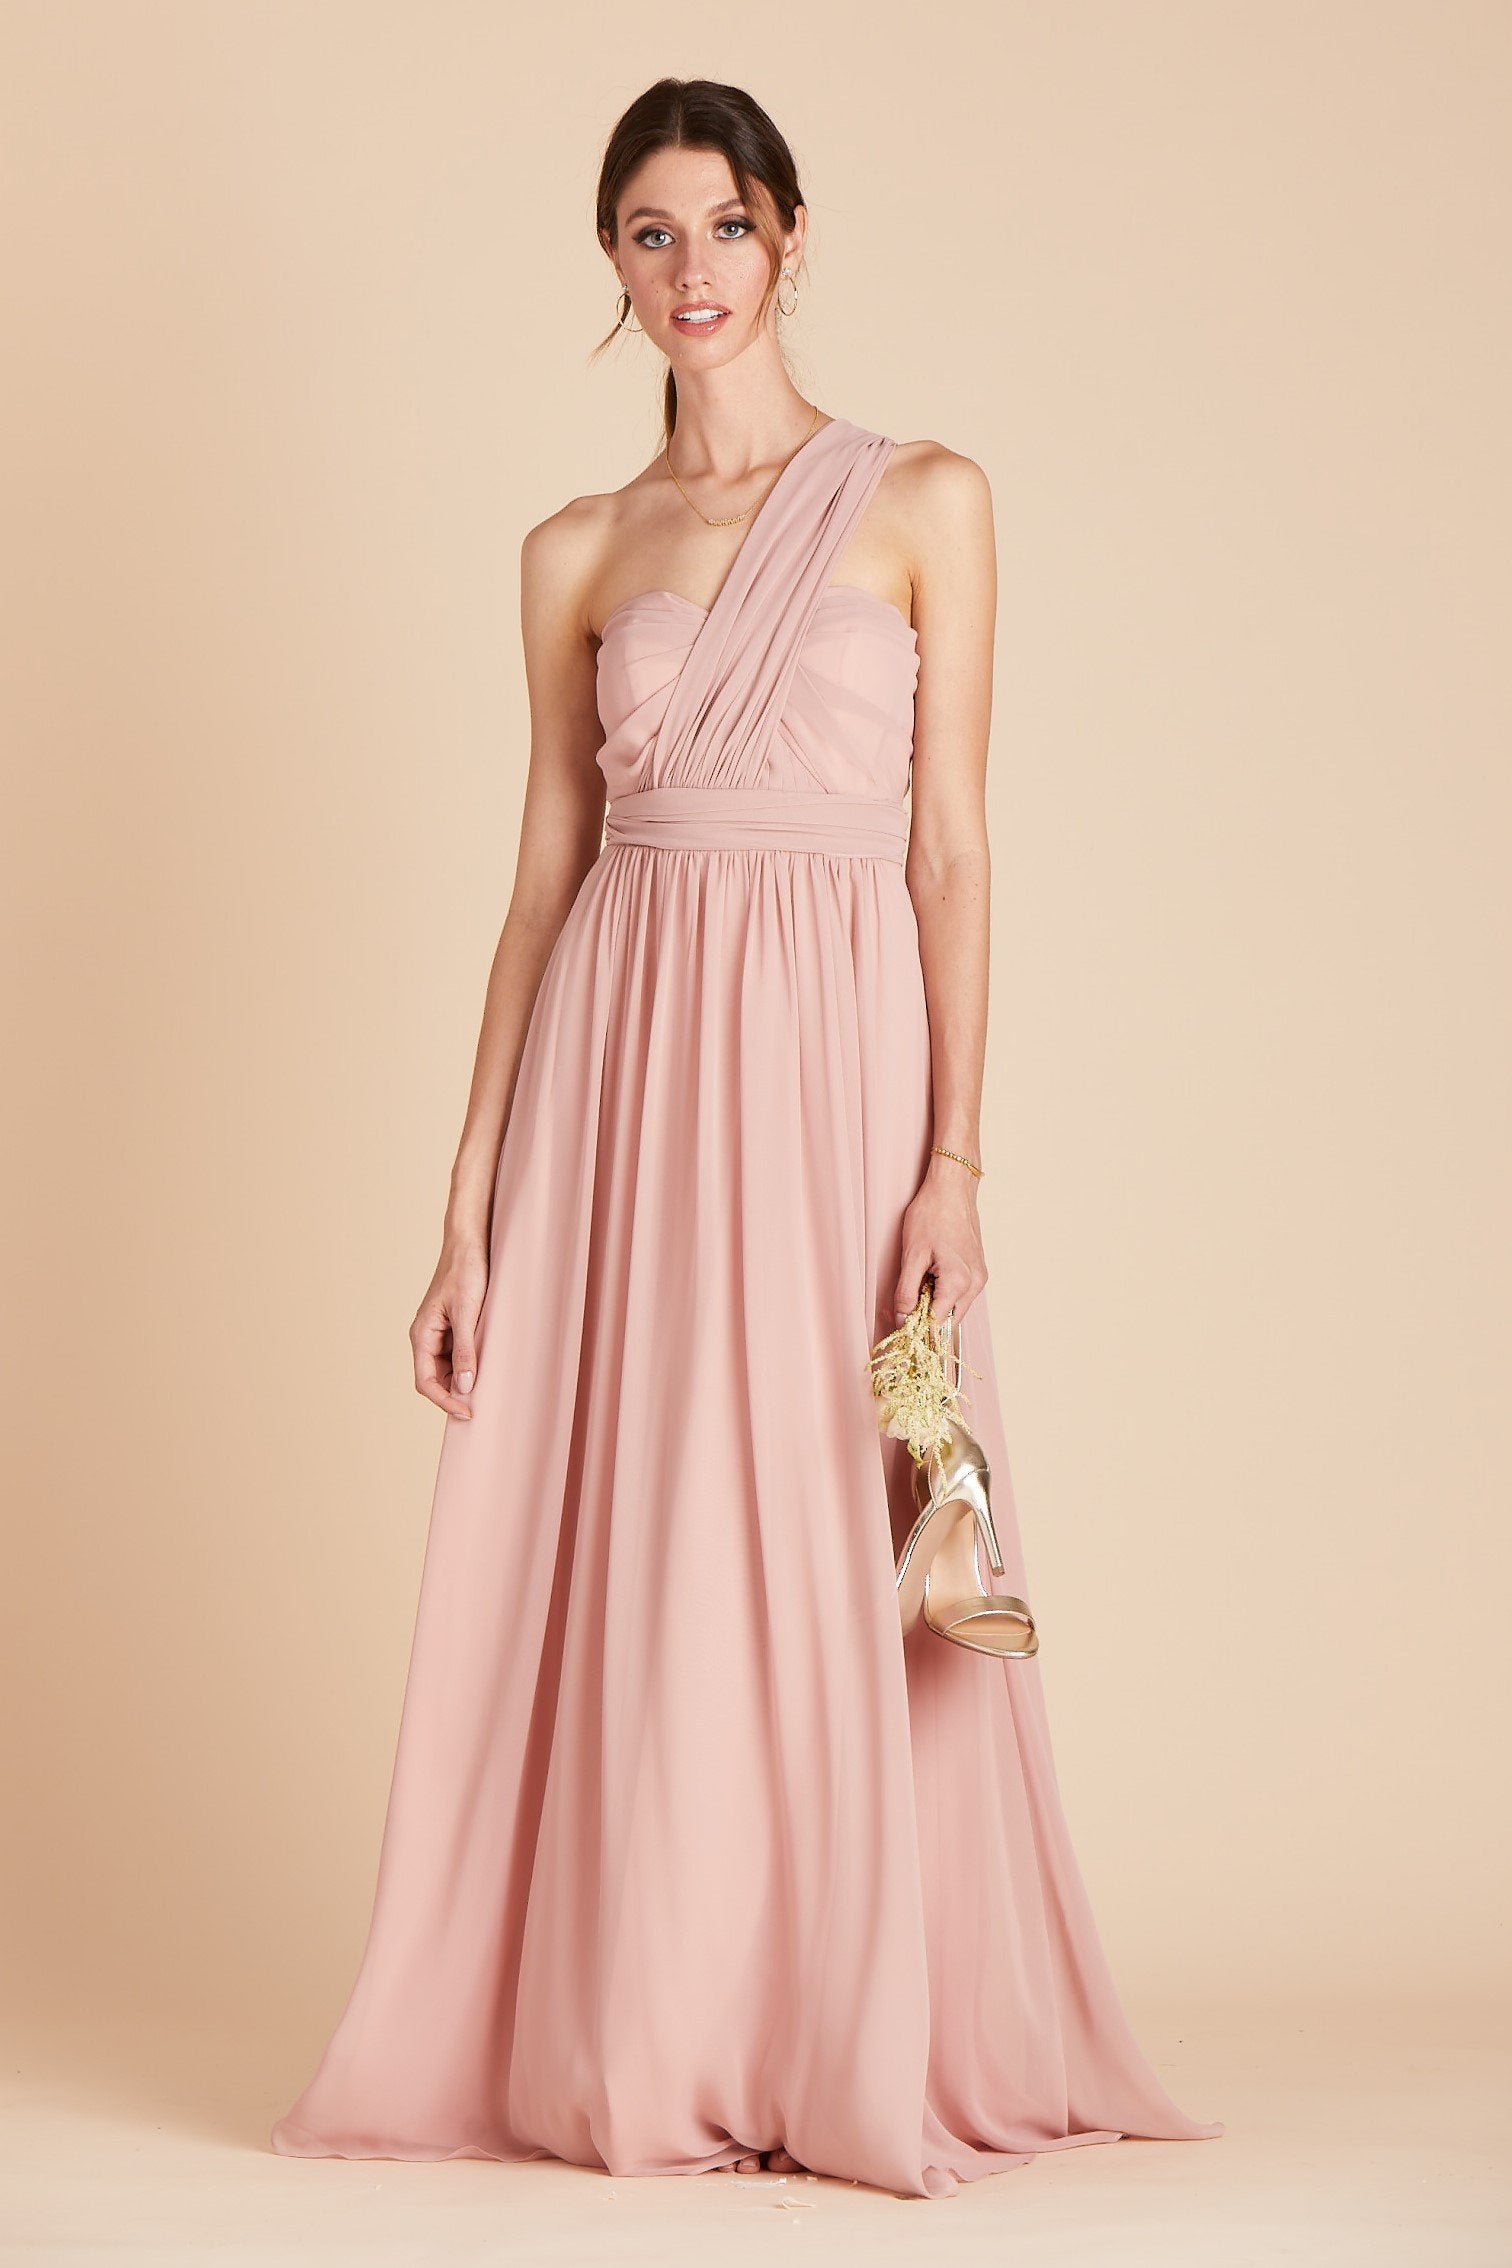 Front view of the Grace Convertible Dress in dusty rose chiffon worn by a slender model with a light skin tone. 